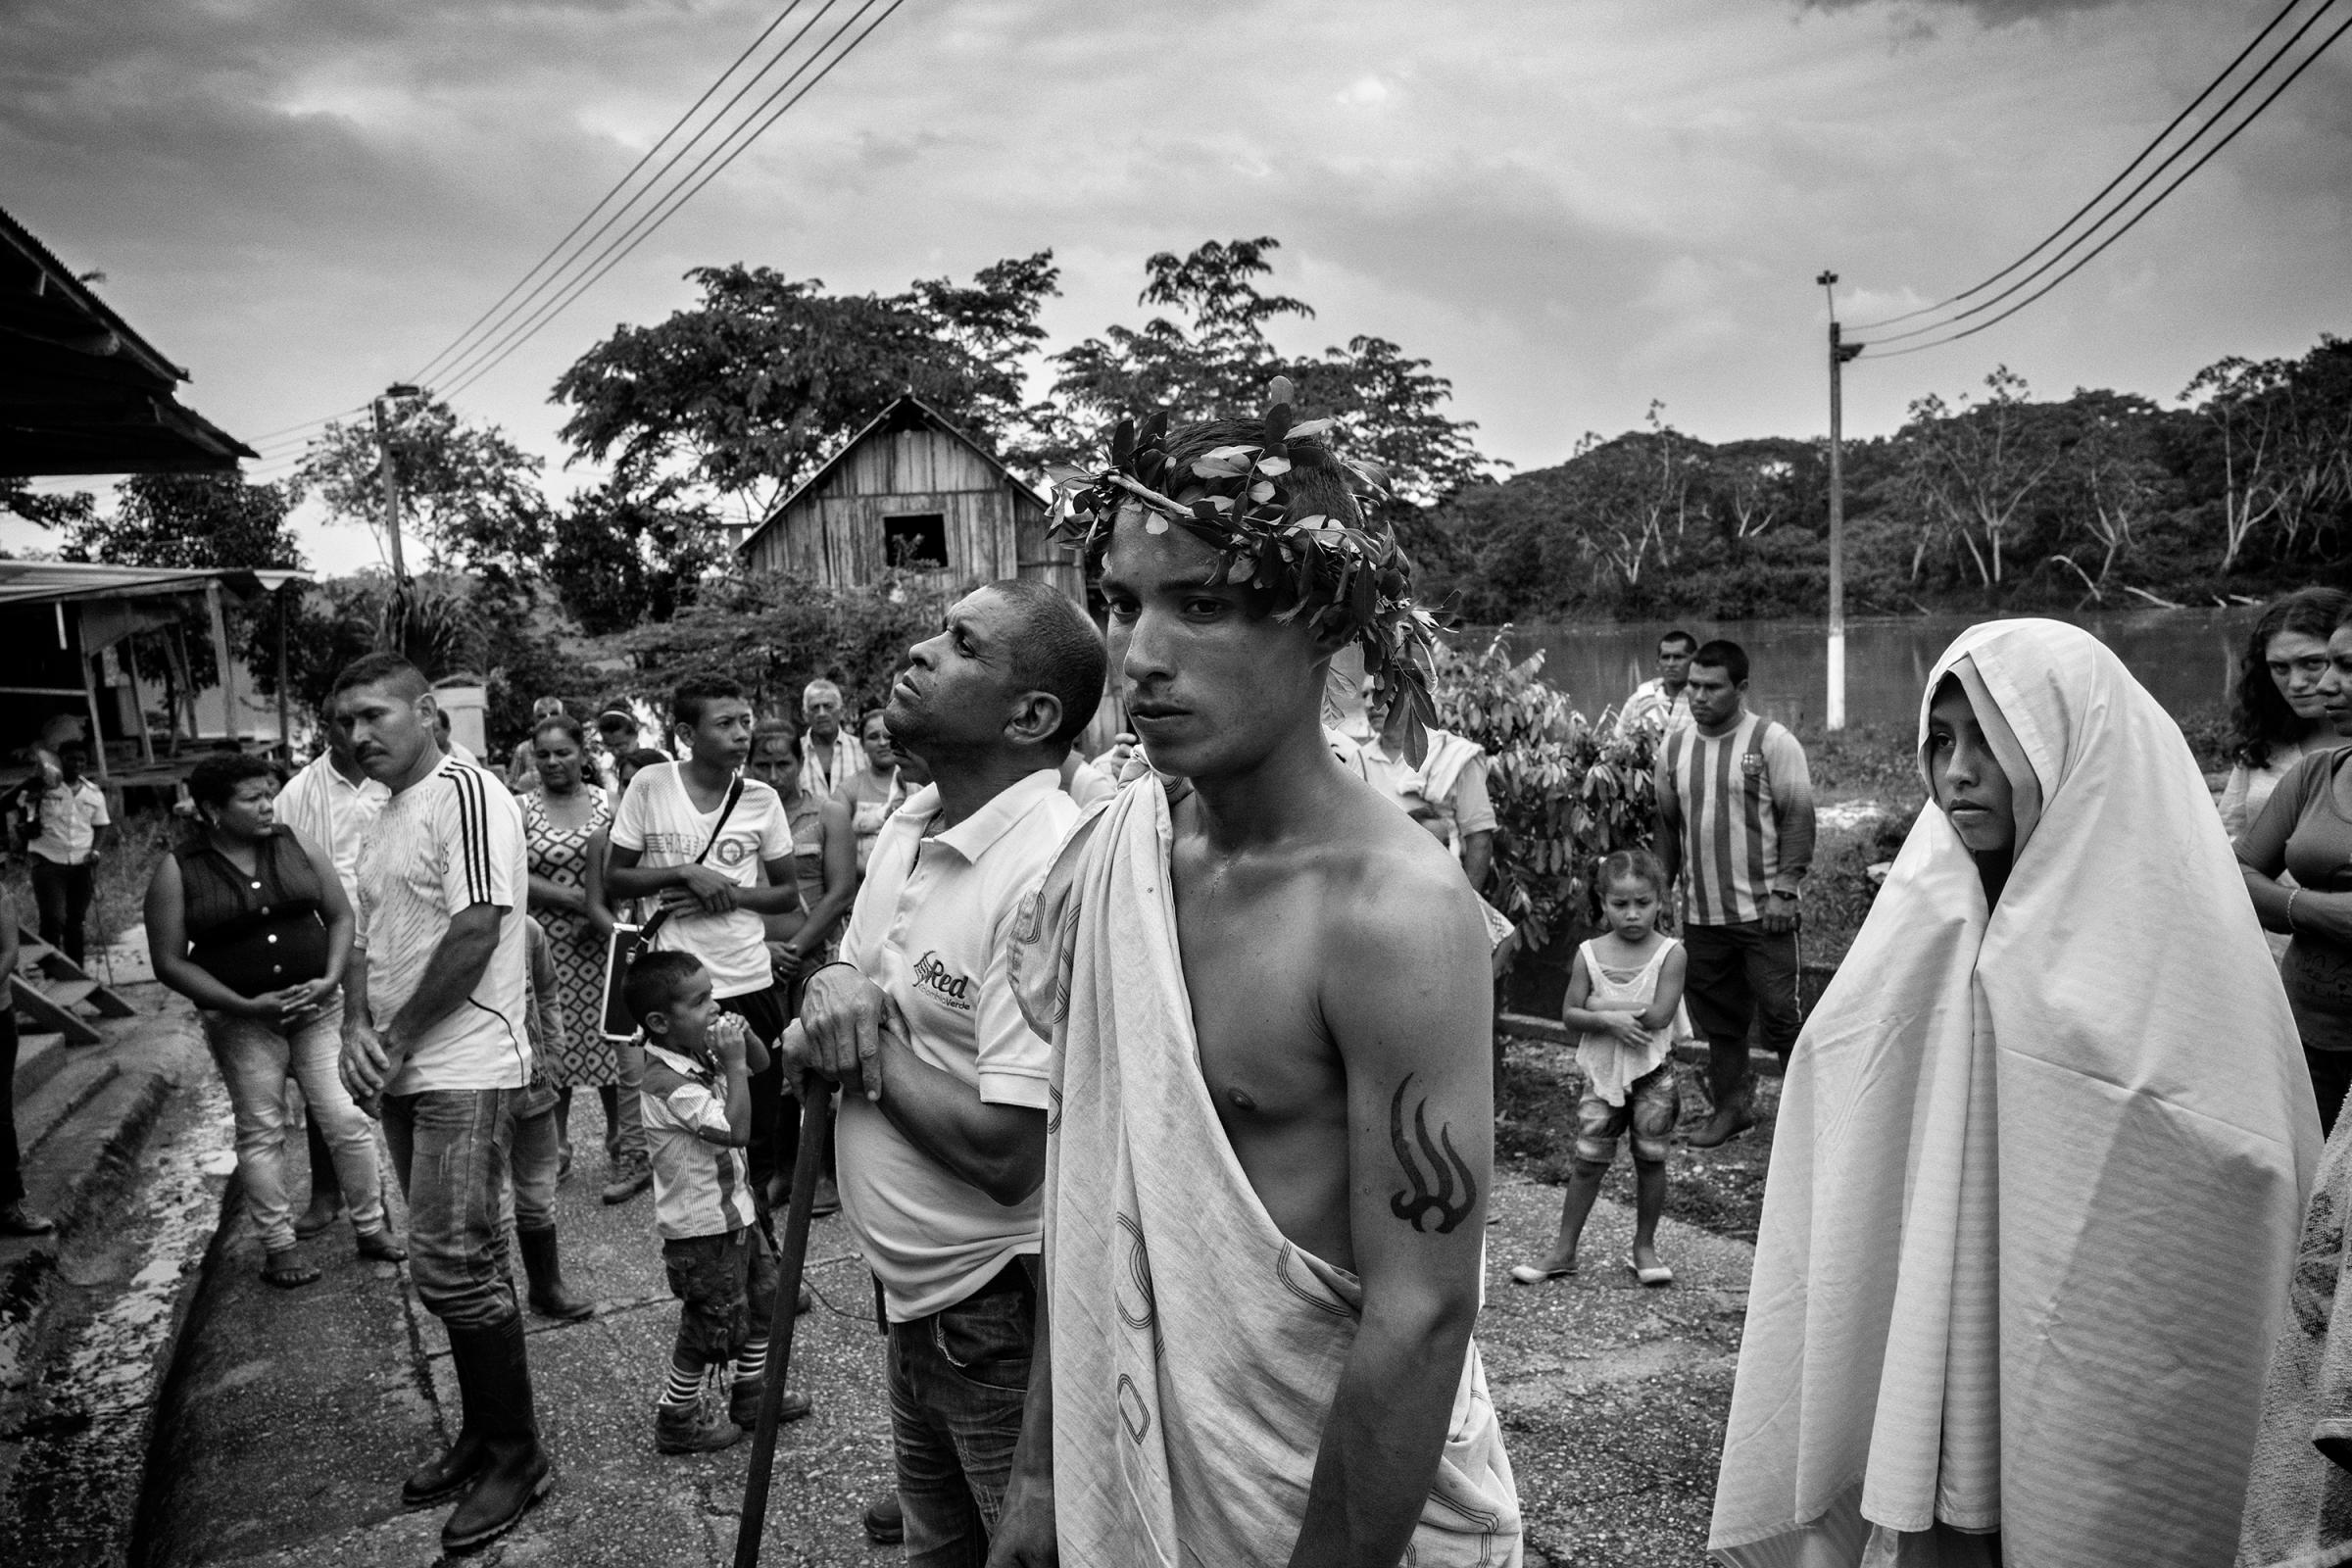 A group of local civilians attend Easter celebrations in the community of Puerto Camelias del Caguan, Caqueta, Colombia, April, 2016.